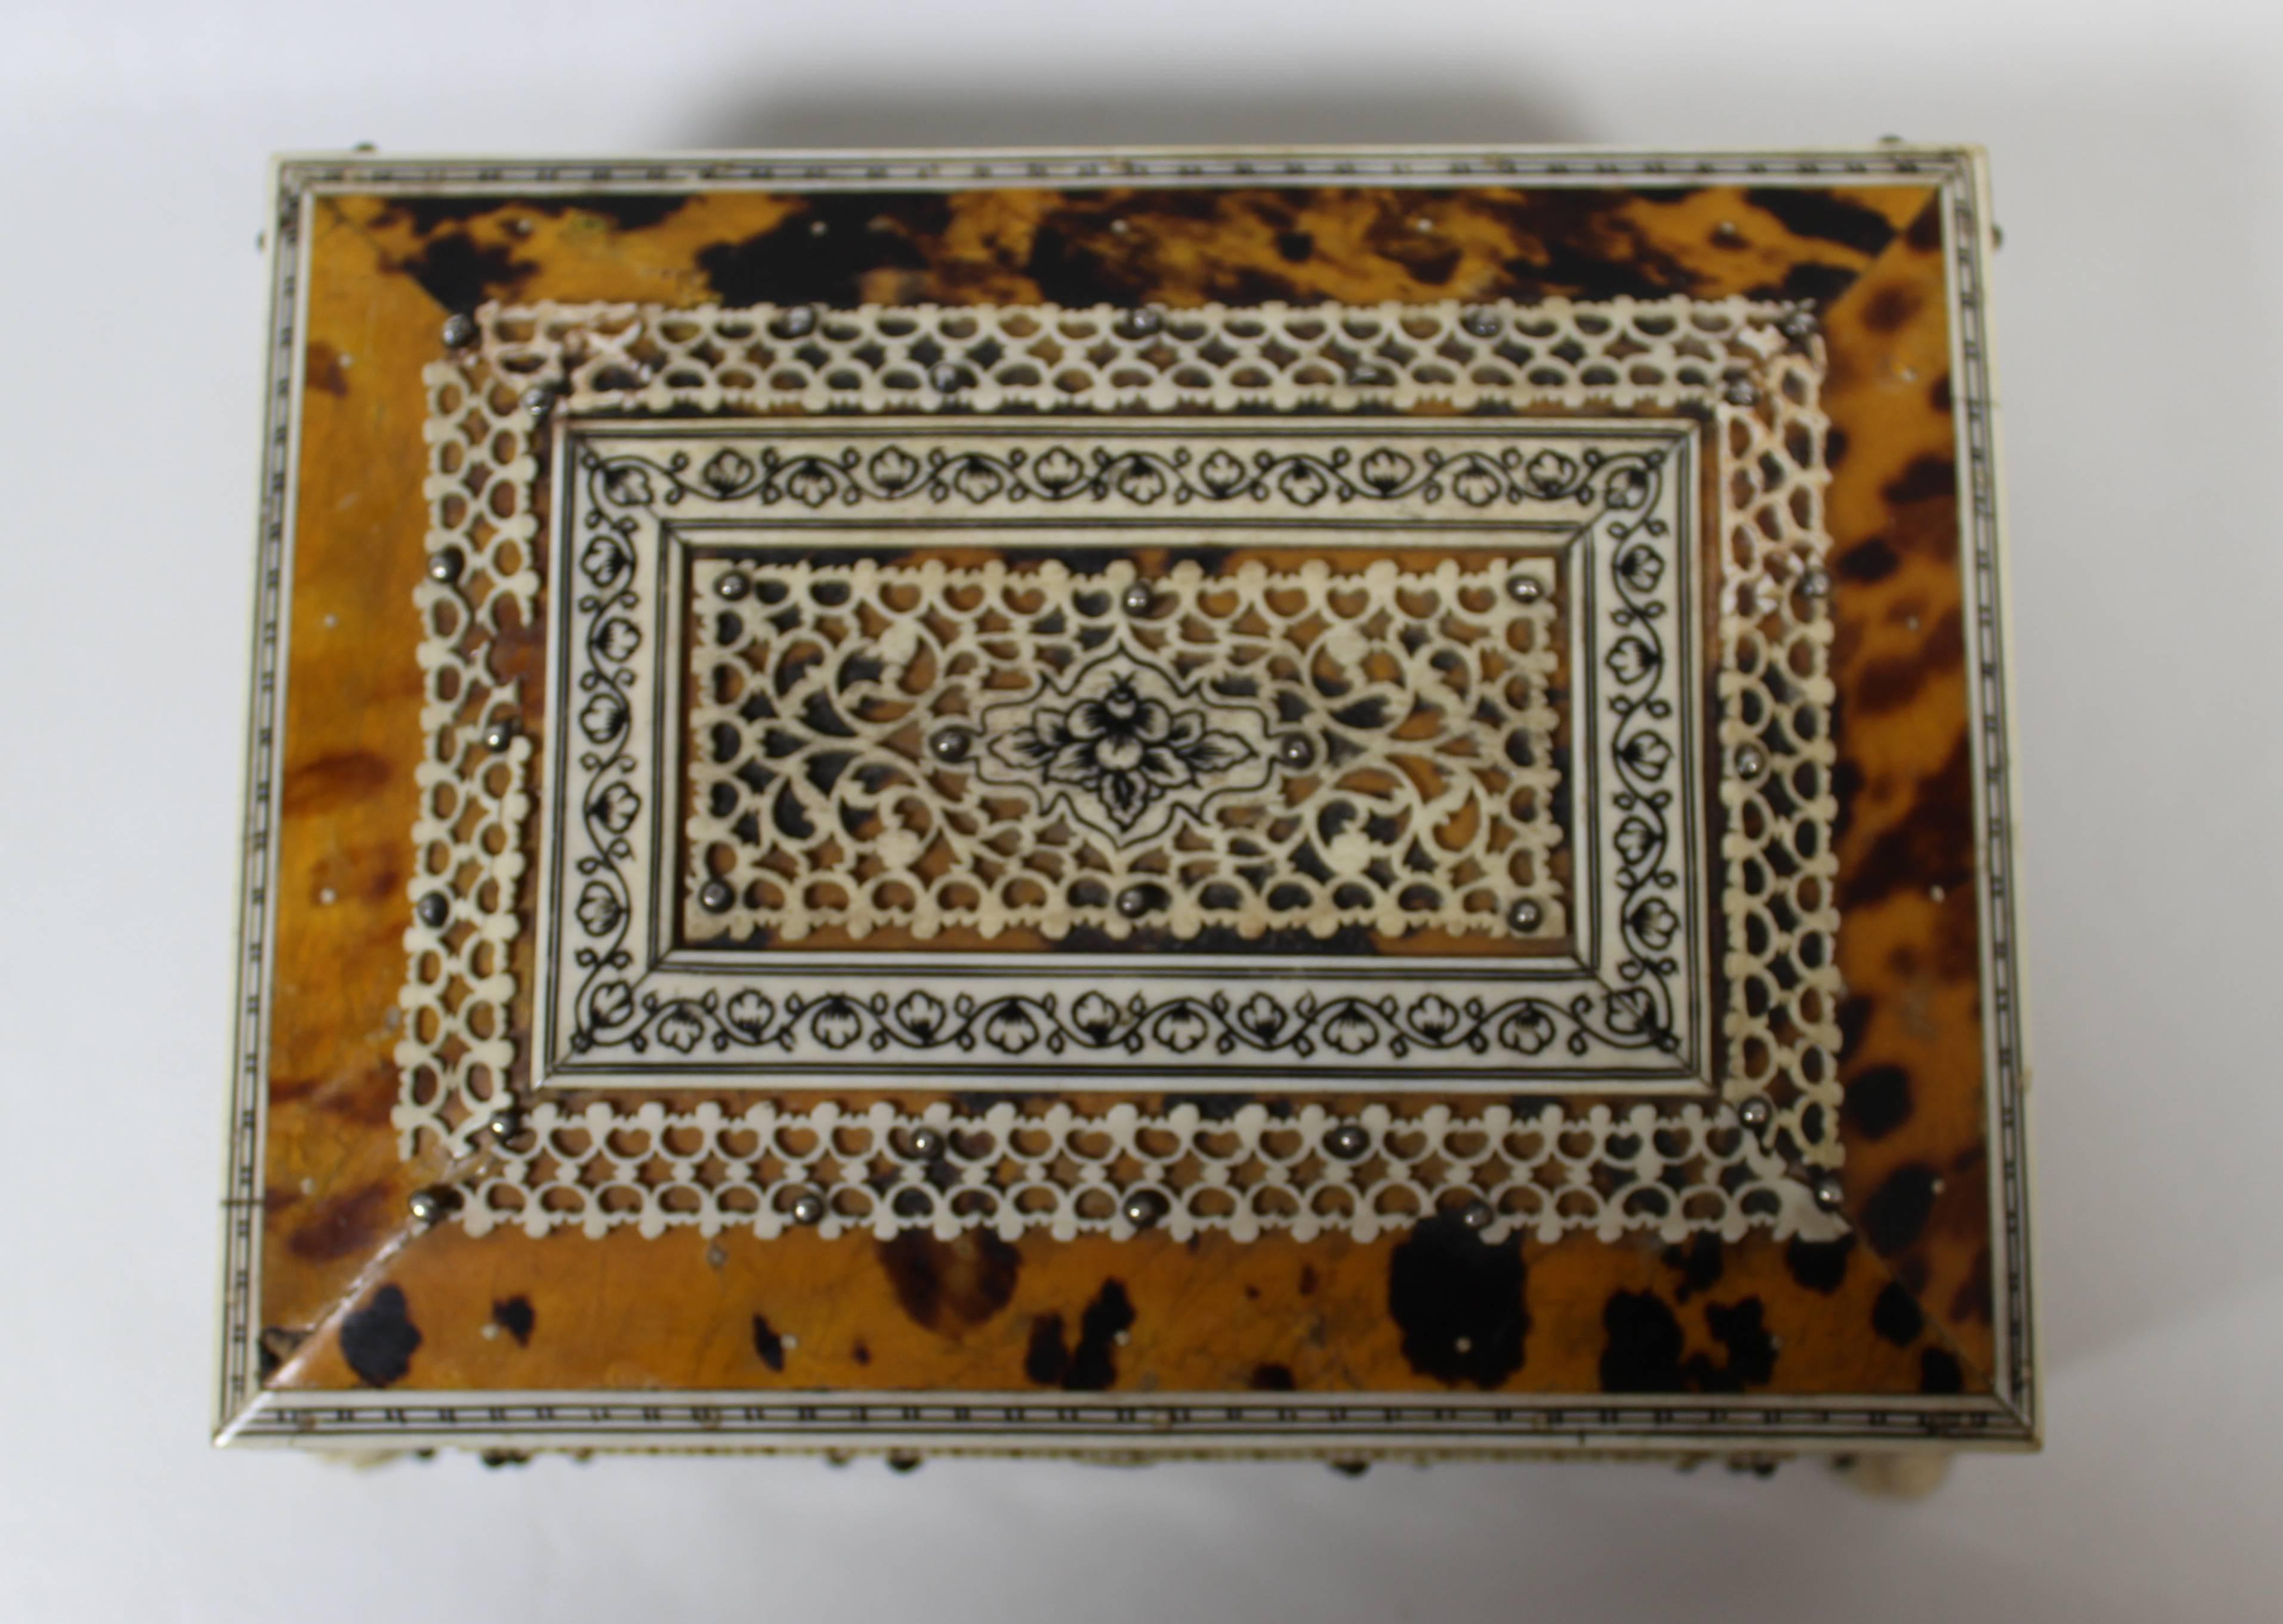 Anglo-Indian Tortoise Shell and Ivory Box, 19th Century

Jewelry or Trinket Box.

Free Shipping within the United States and Canada.